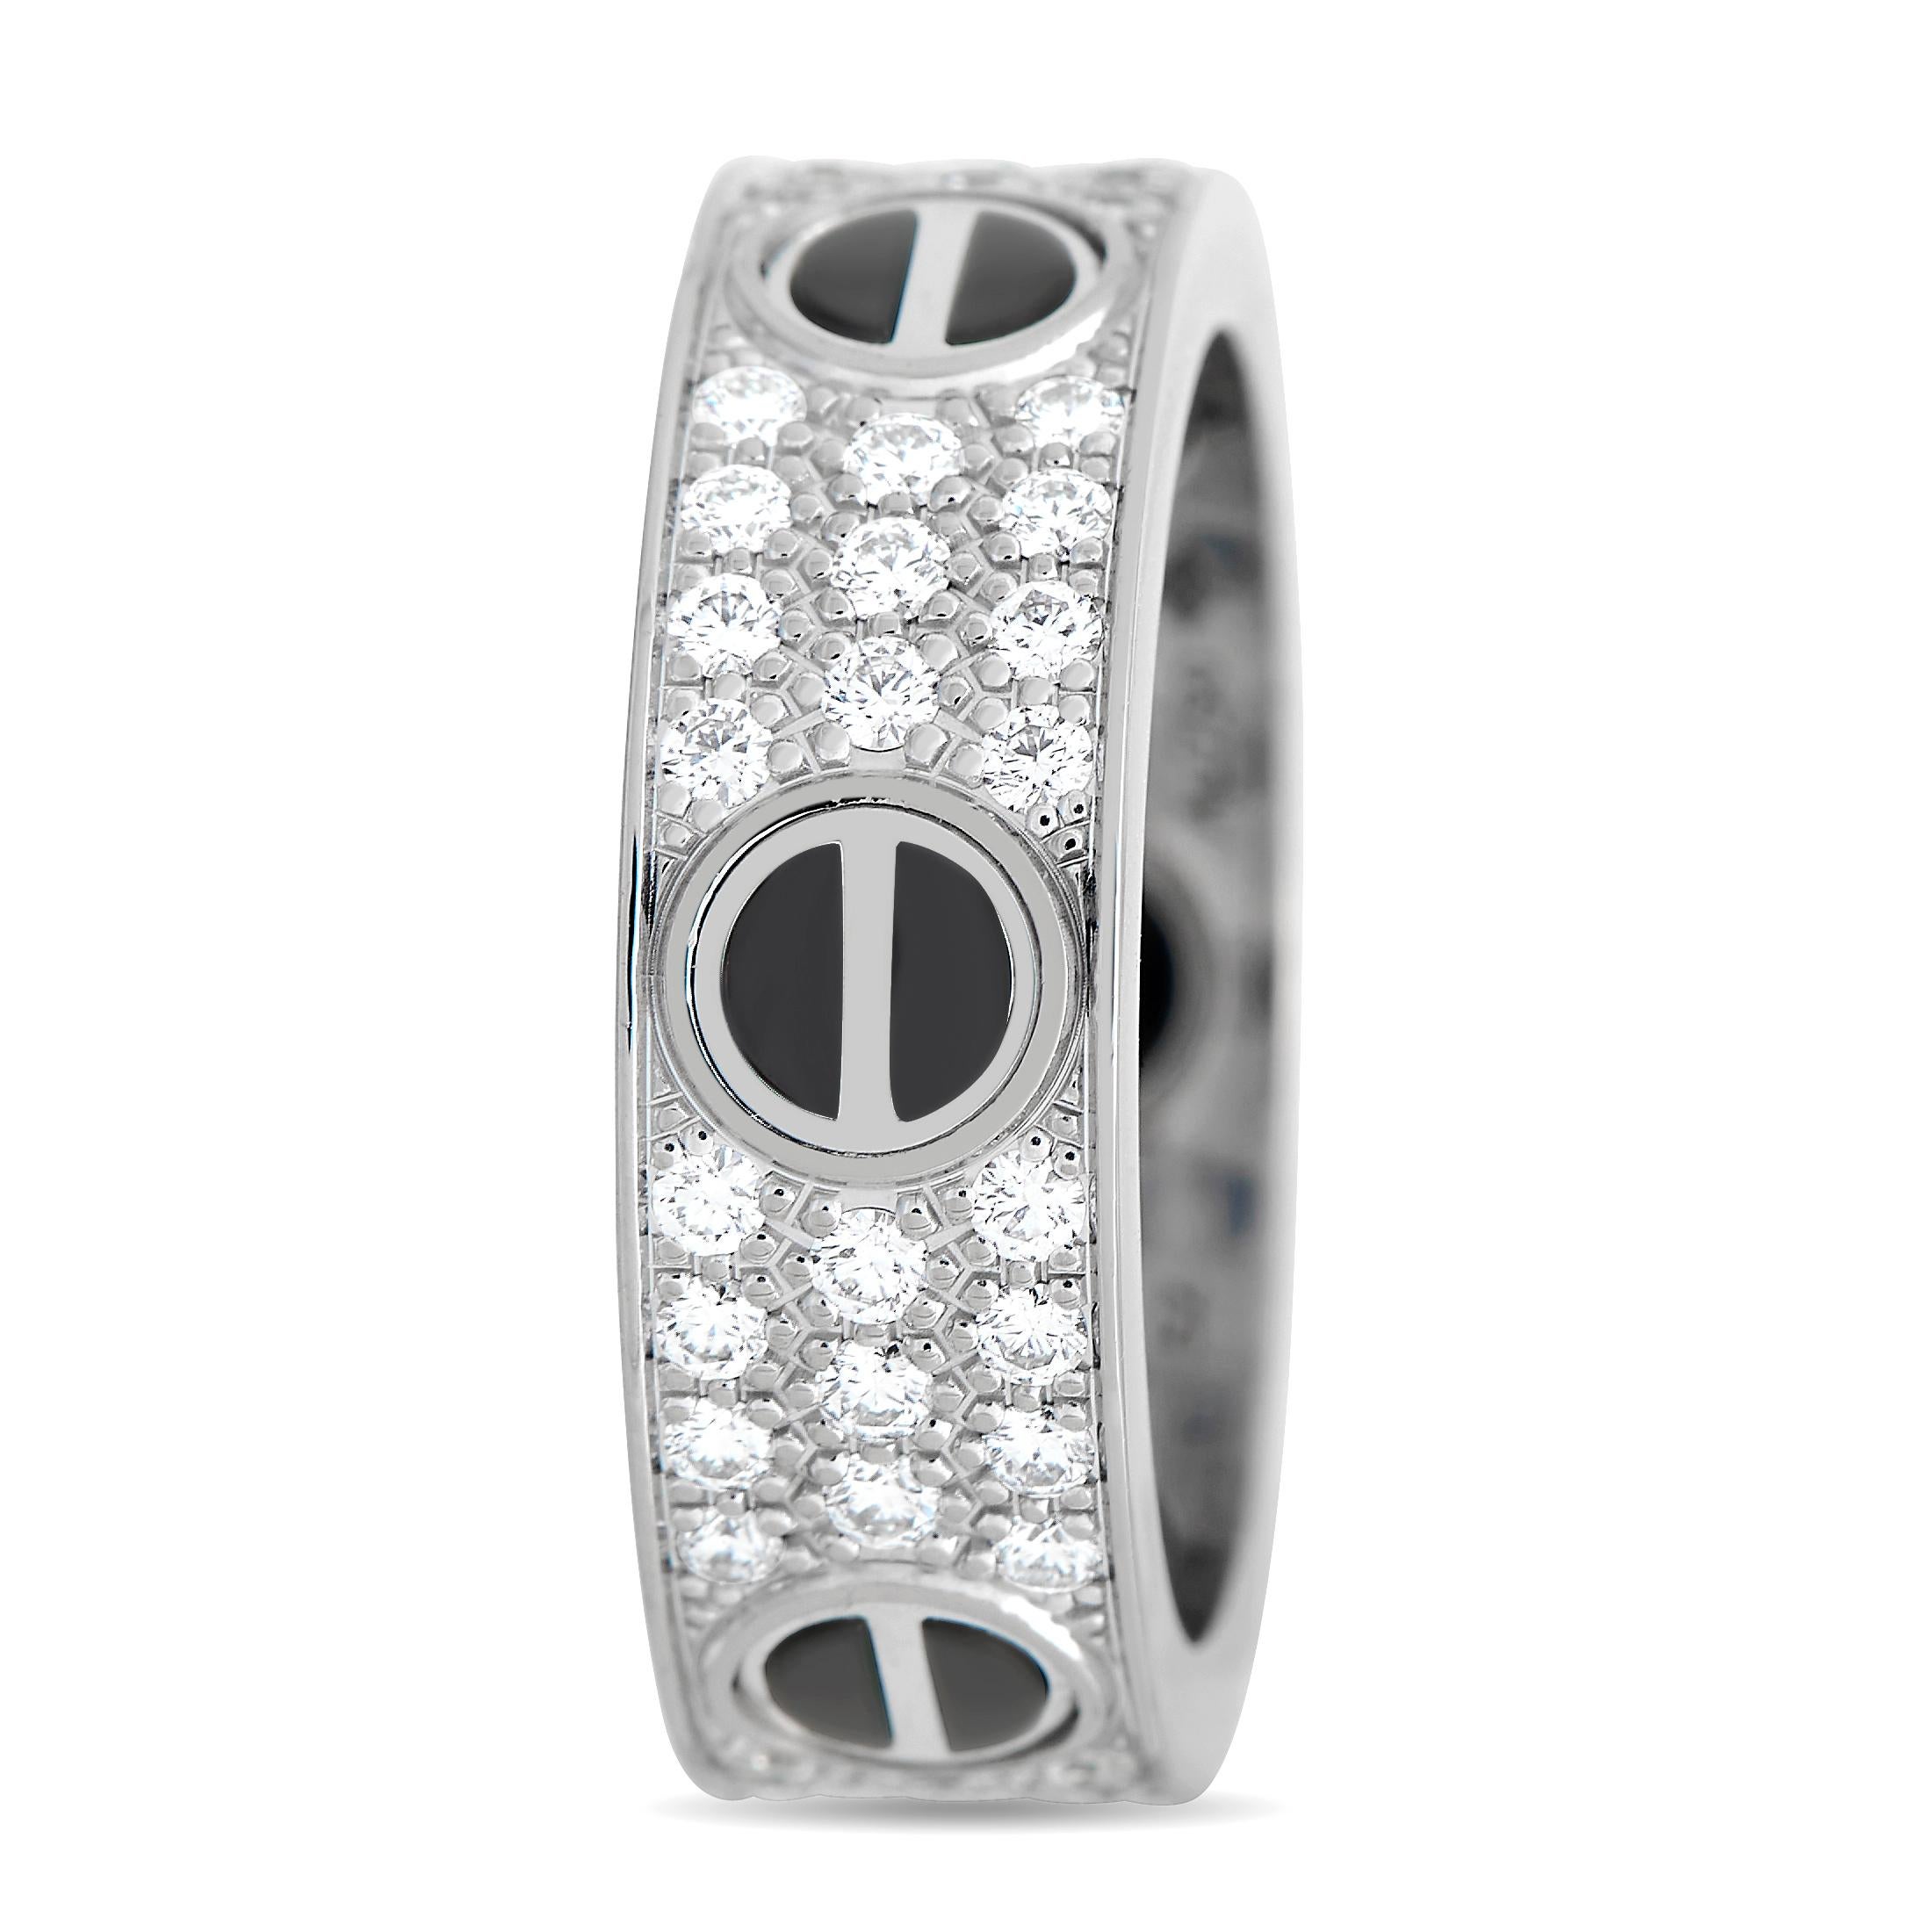 This gender-neutral LOVE ring from Cartier features an 18K white gold band measuring 6mm in thickness. It bears the iconic screw motif in black ceramic. The band is pavé-set with 66 brilliant-cut diamonds. 